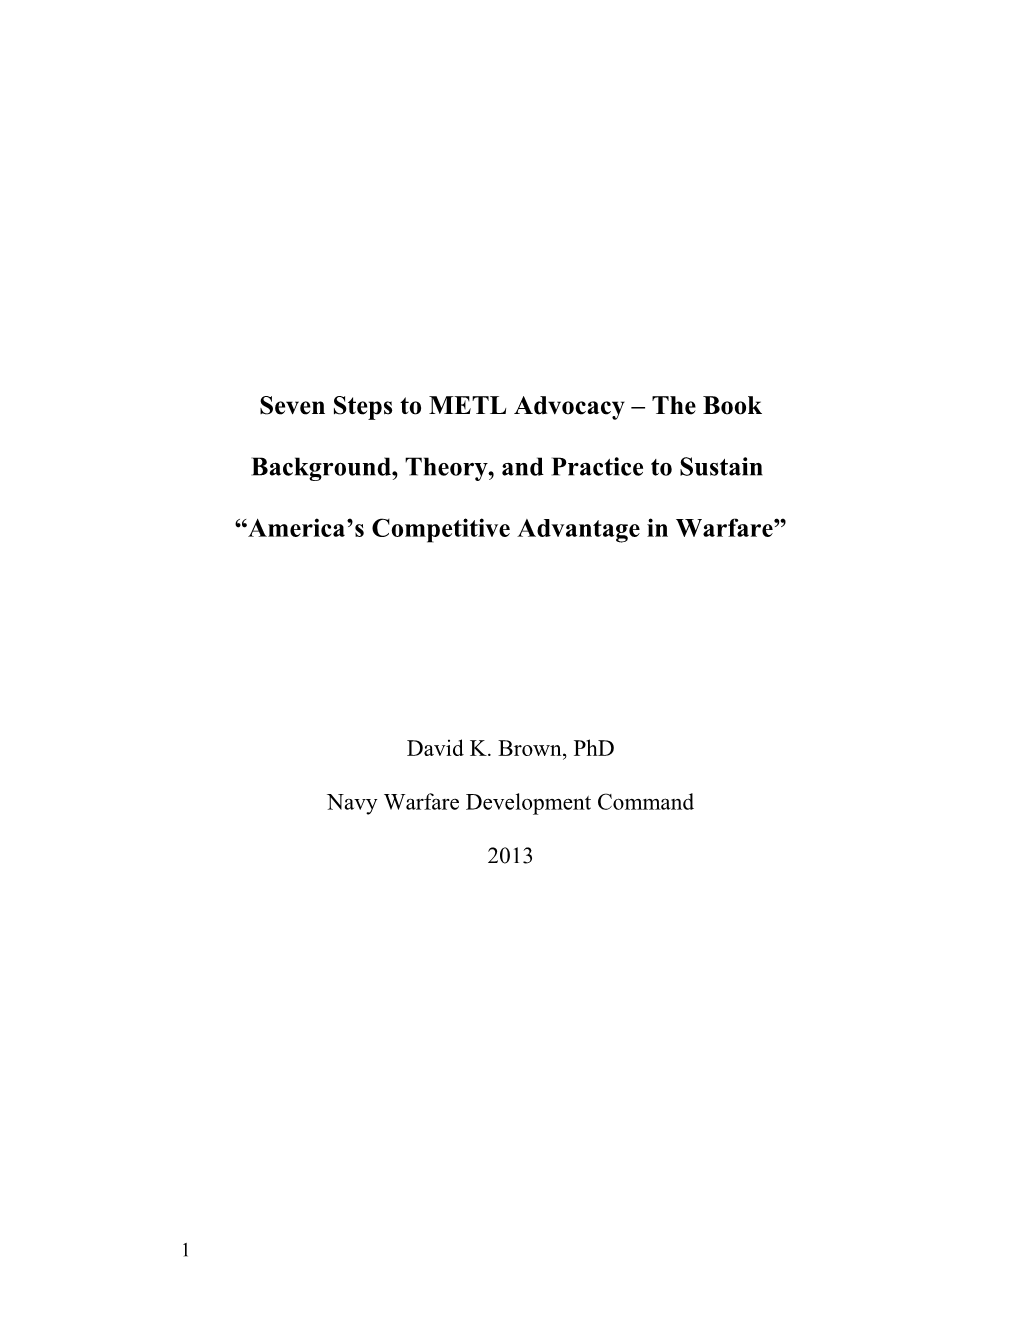 Seven Steps to METL Advocacy the Book